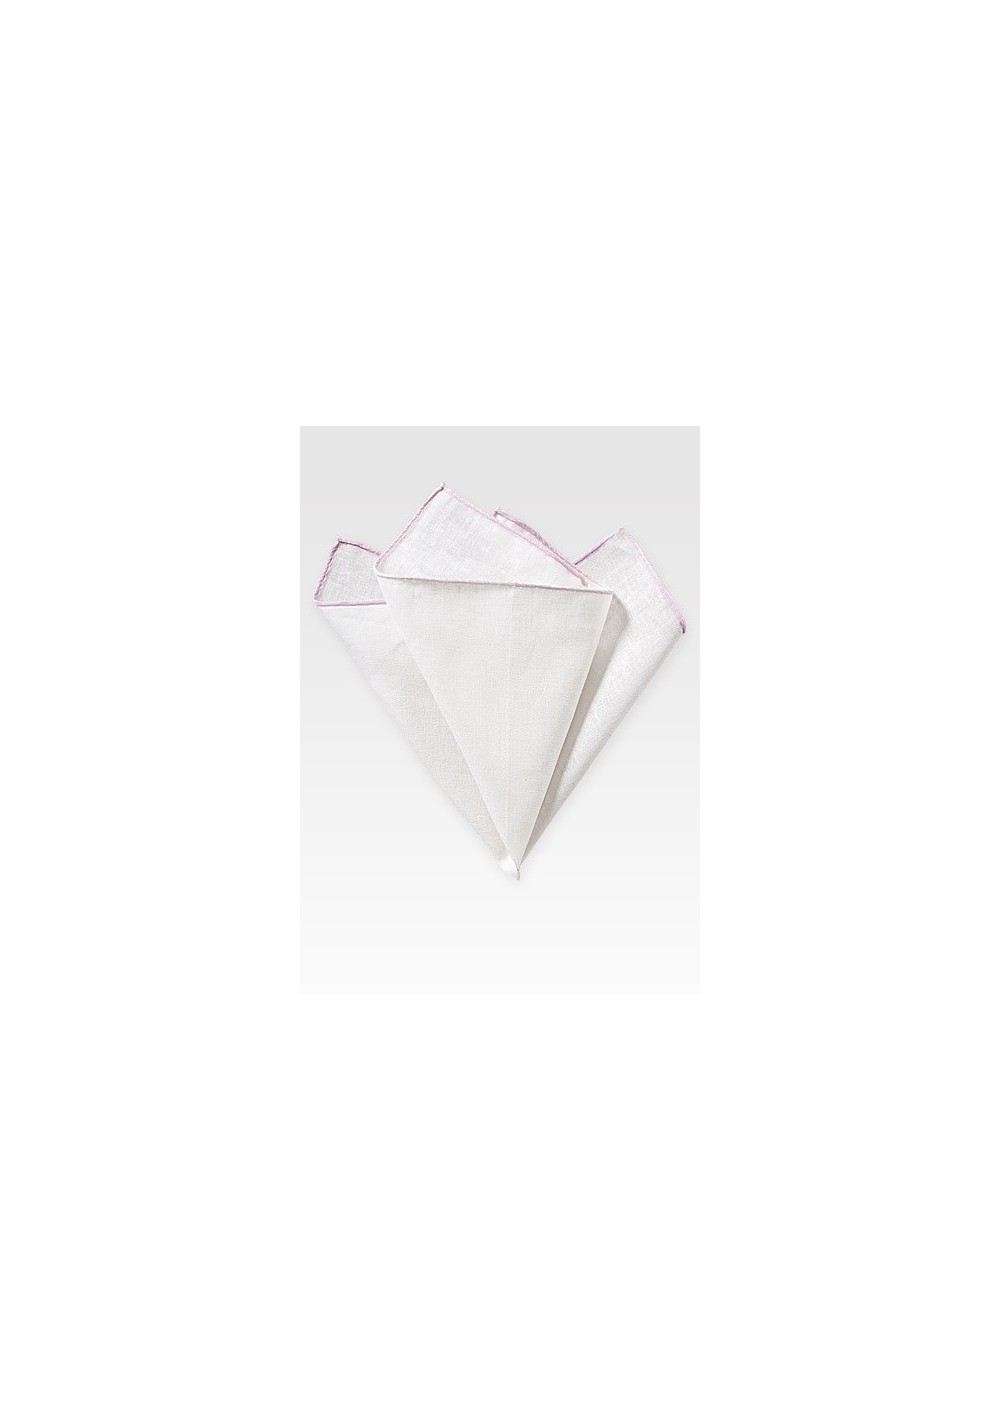 White Linen Hanky with Blush Color Border